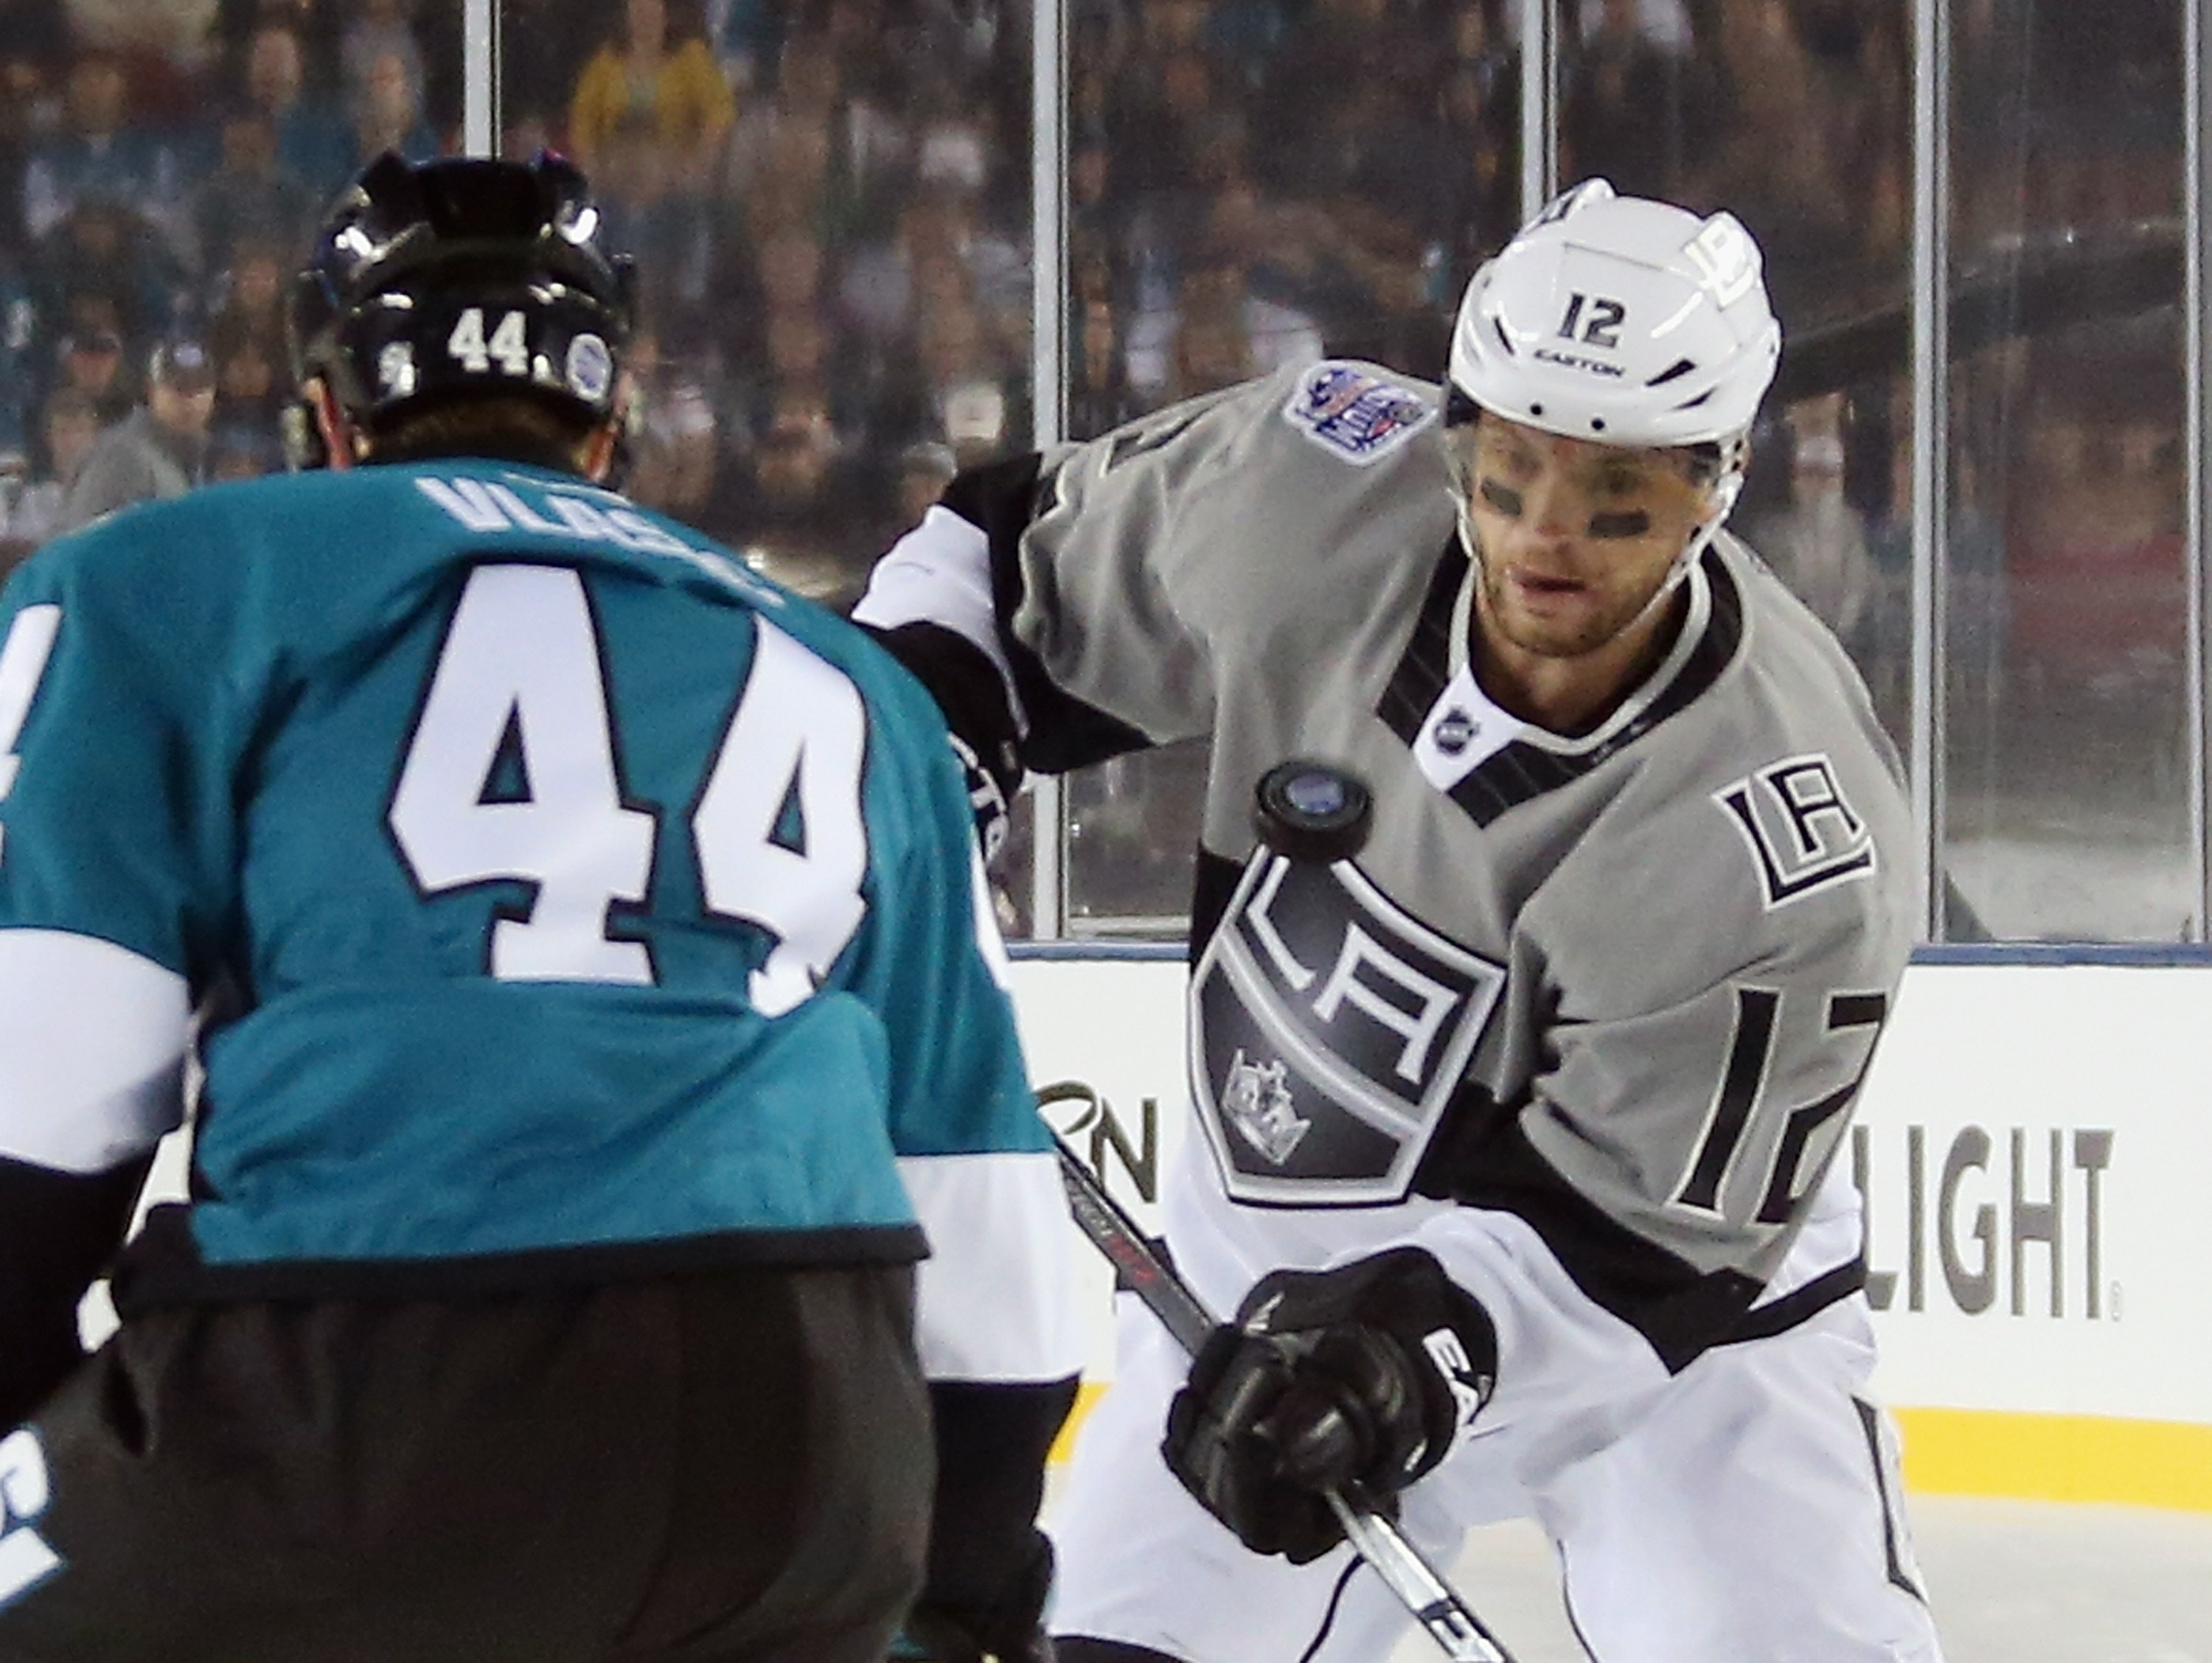 2015 COORS LIGHT NHL STADIUM SERIES™ GAME TO FEATURE SAN JOSE SHARKS AND  LOS ANGELES KINGS AT LEVI'S® STADIUM